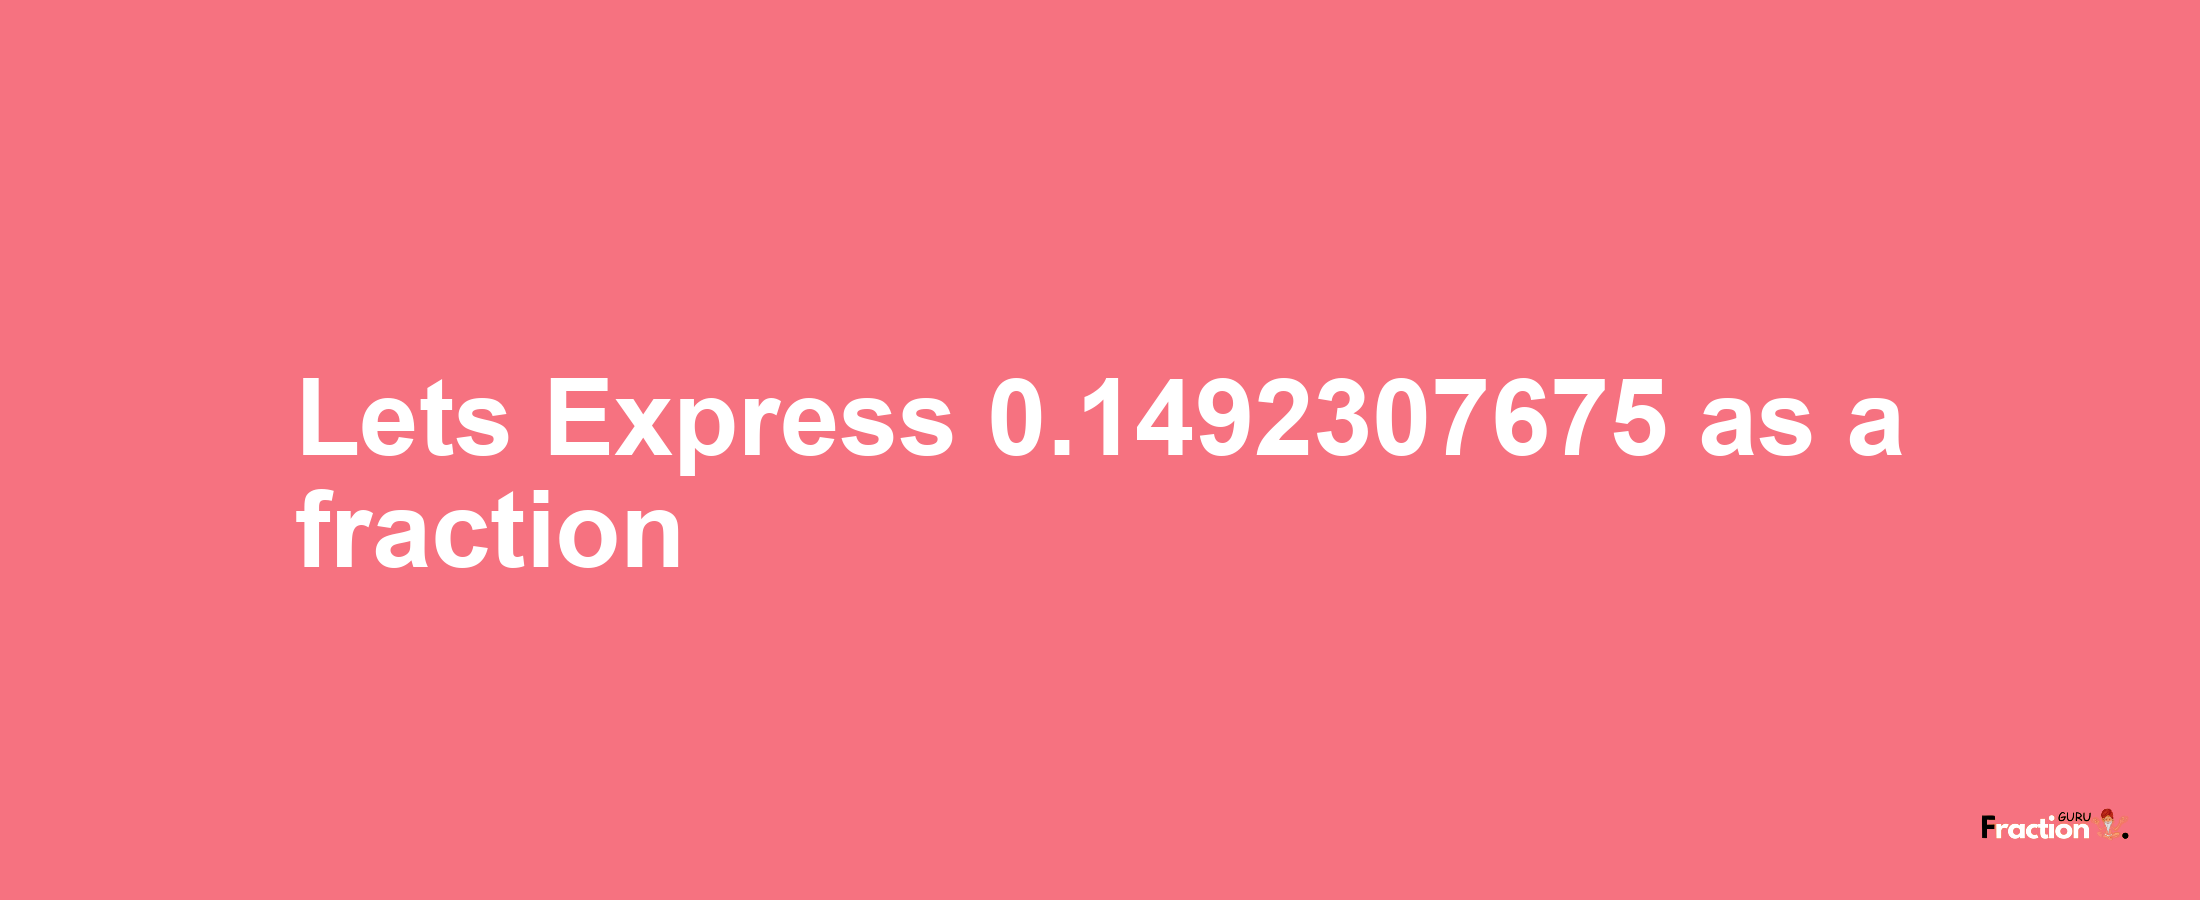 Lets Express 0.1492307675 as afraction